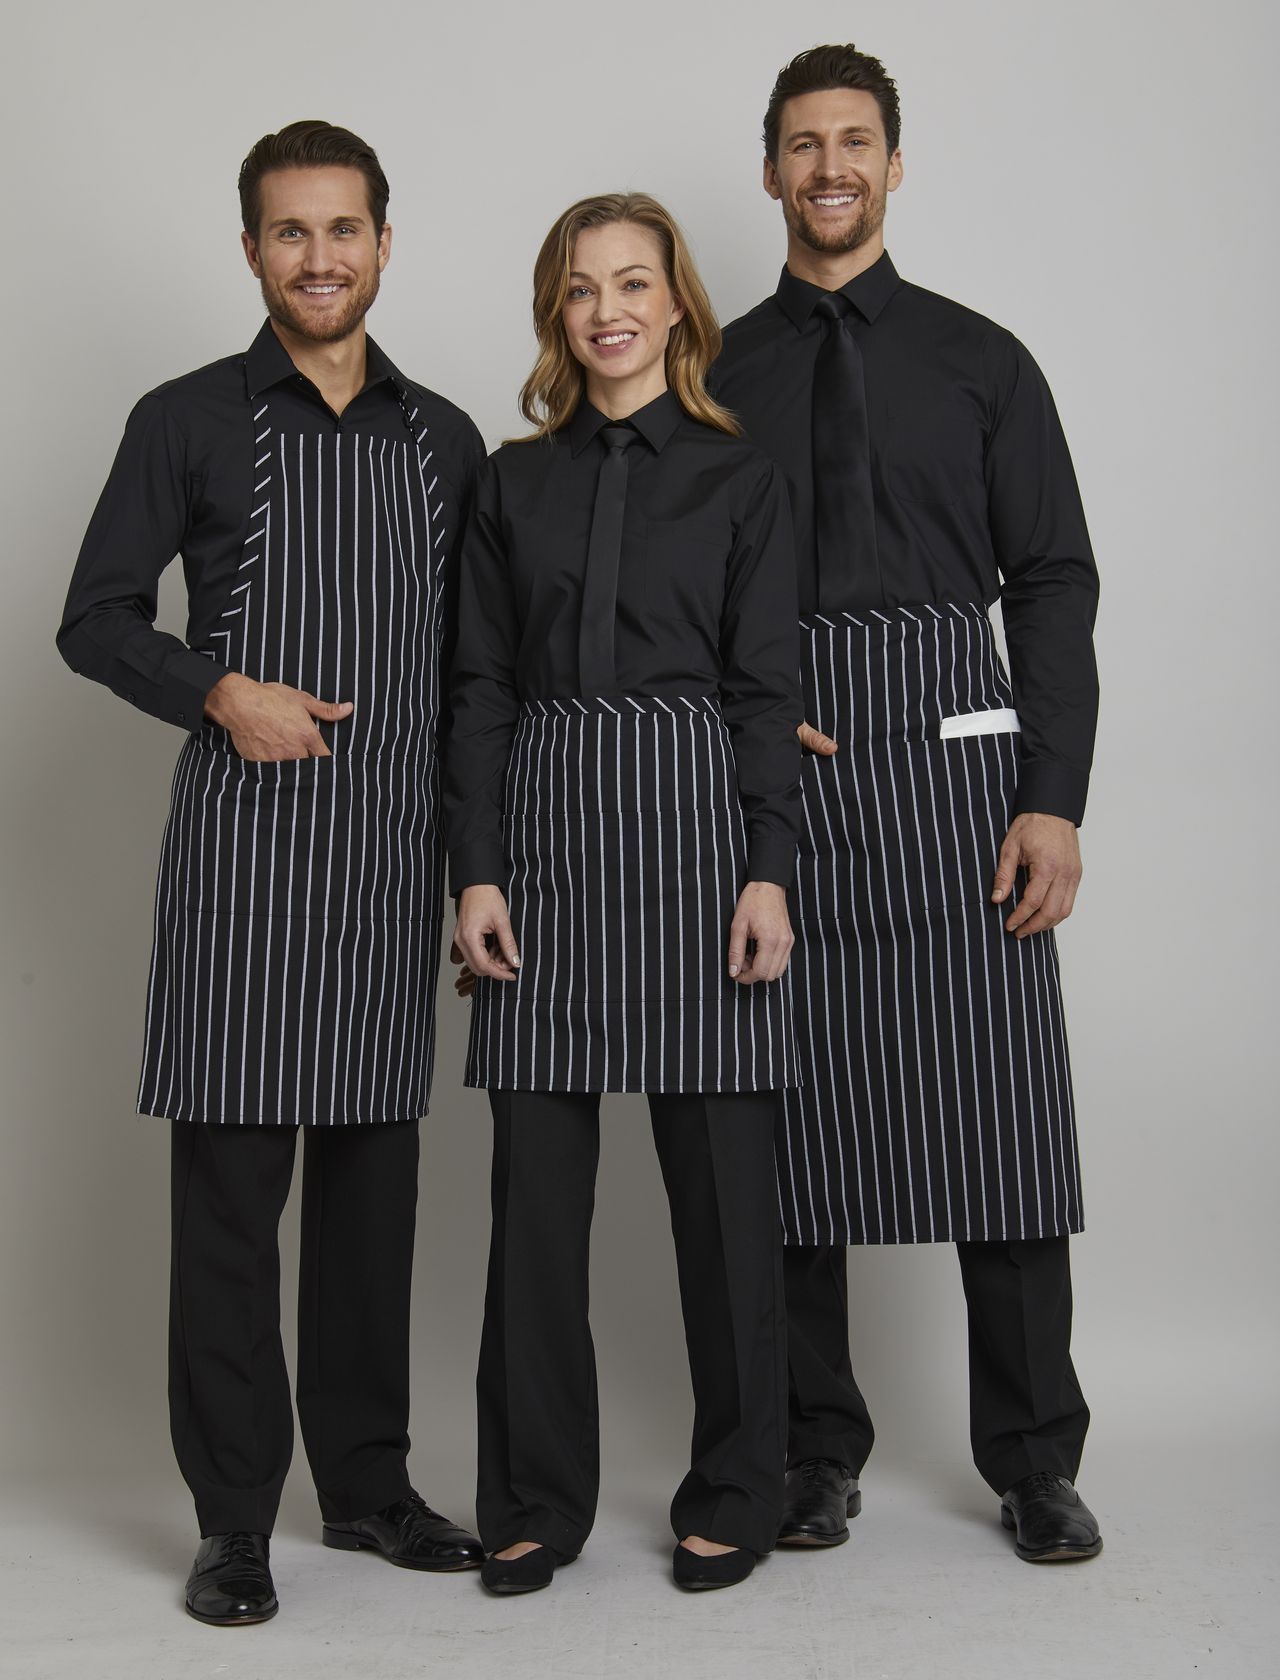 style 7957 Unisex Pin Striped Apron Butcher Food Industry Chef Restaurant 